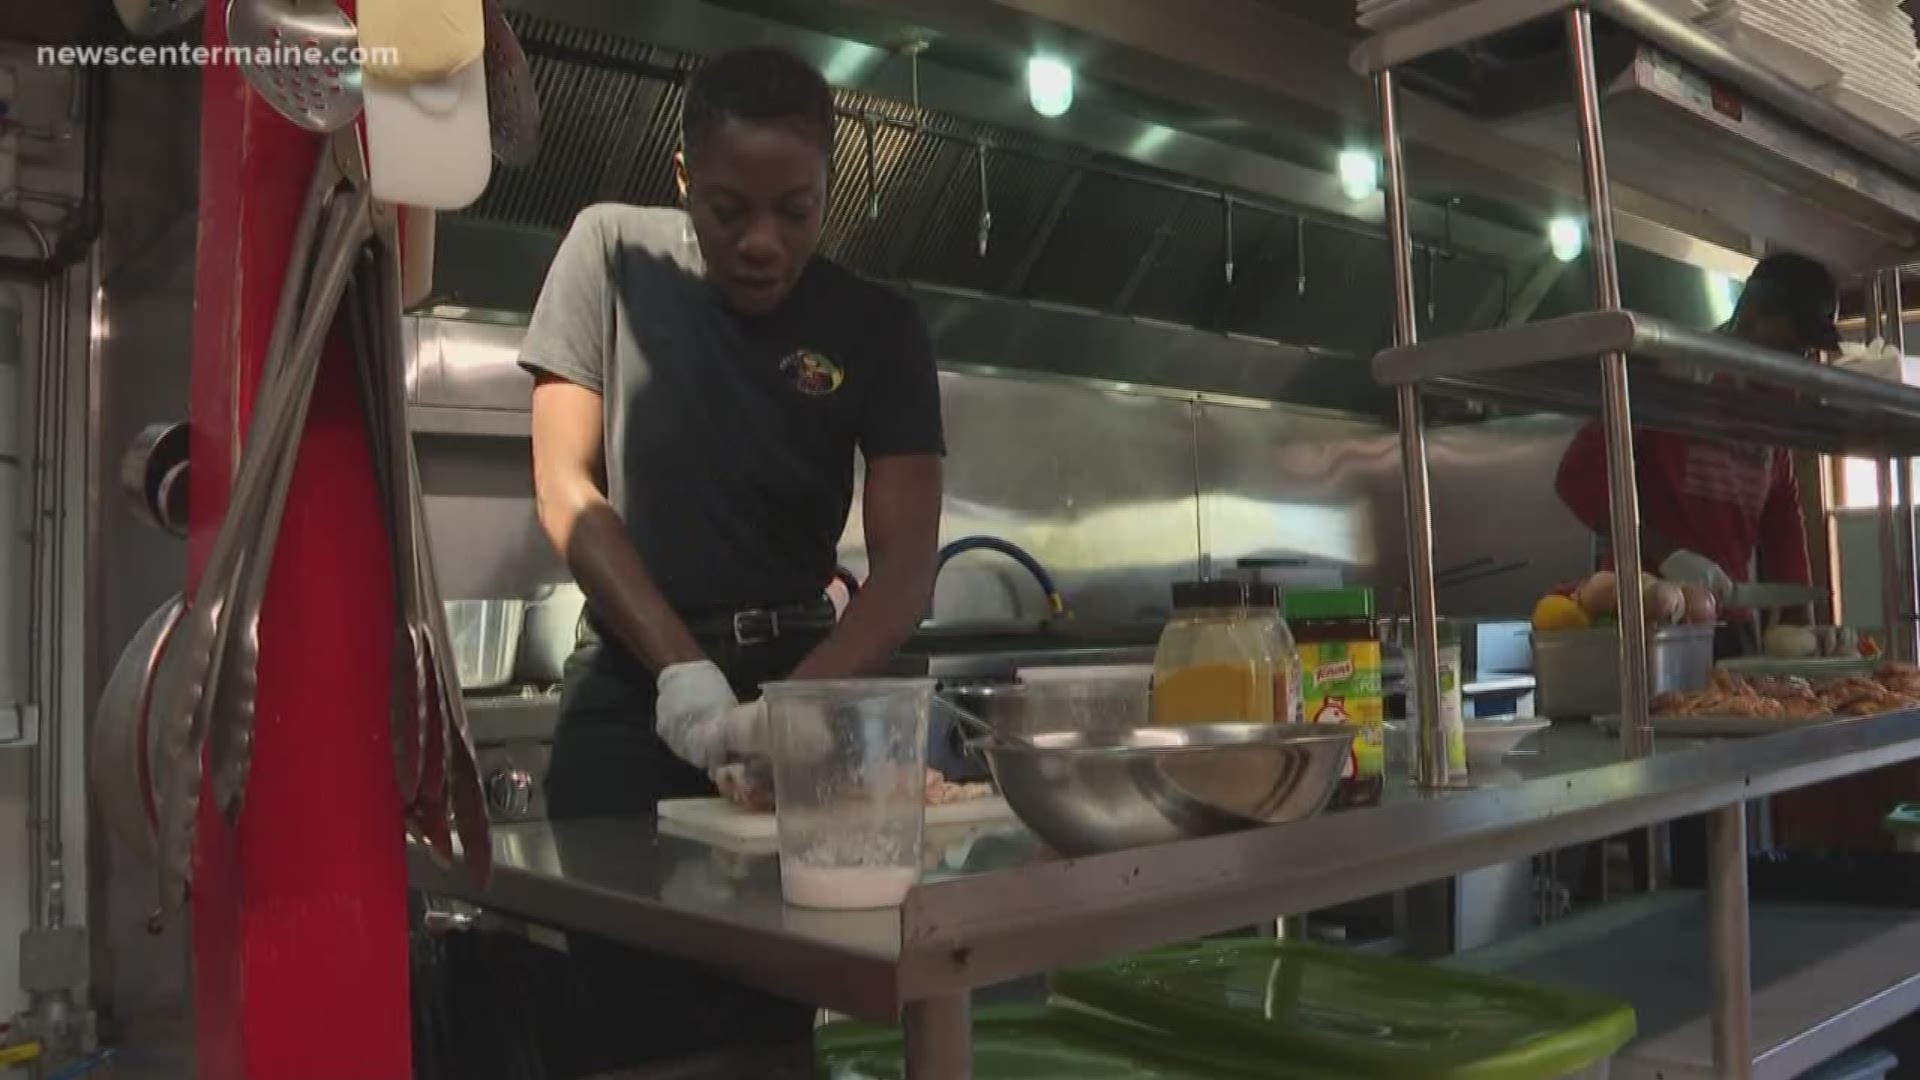 The Jamaican immigrant family who owns One Love Cuisine is helping to feed Sanford's homeless population with free meals.